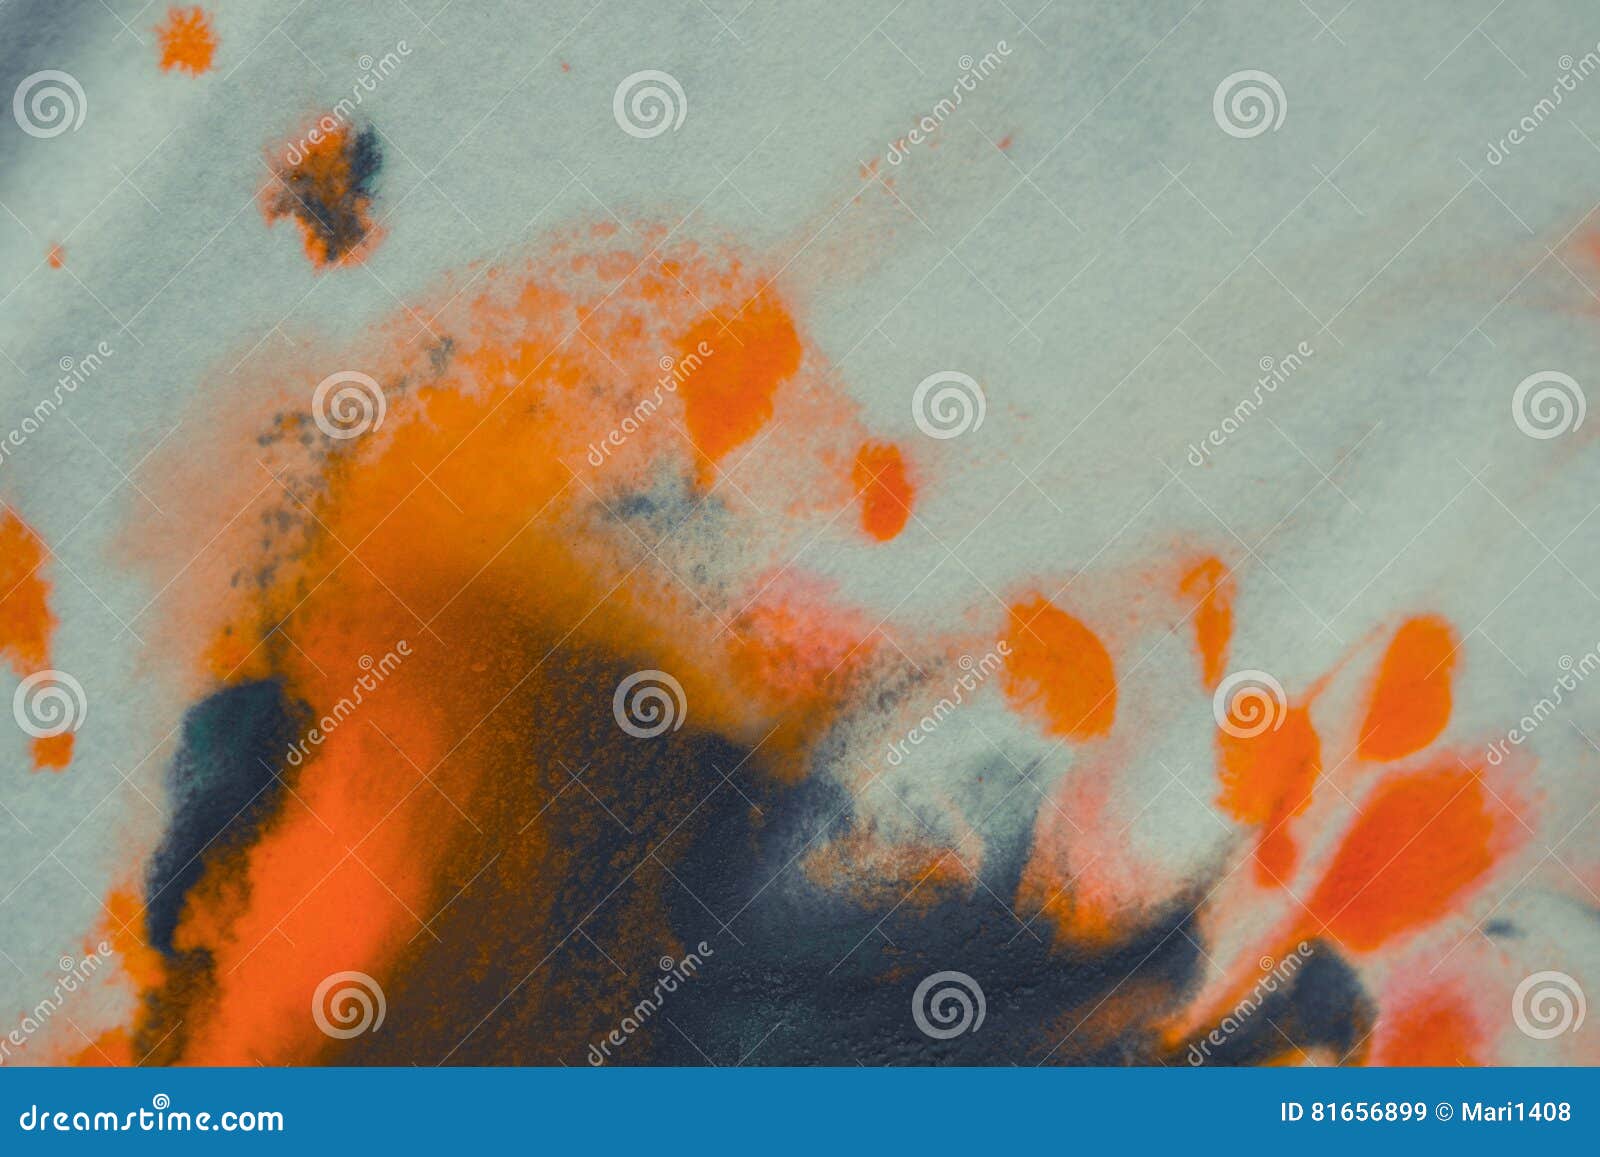 Overflowing Bright Orange And Dark Blue Paint On Paper Stock